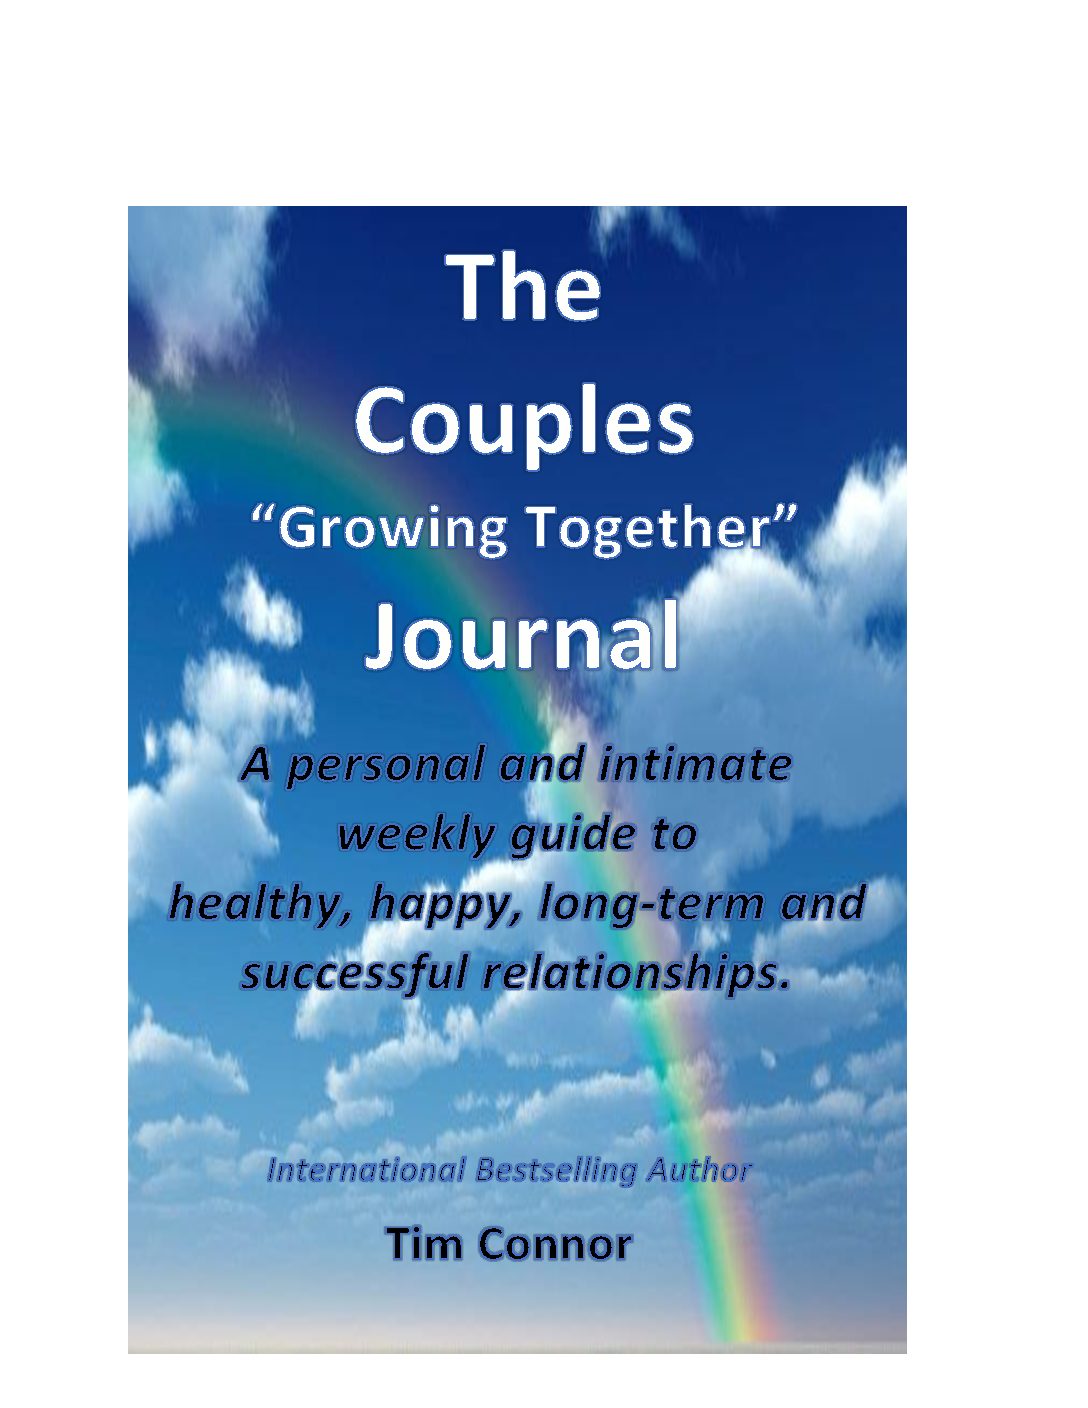 The Couples Growing Together Journal - Tim Connor